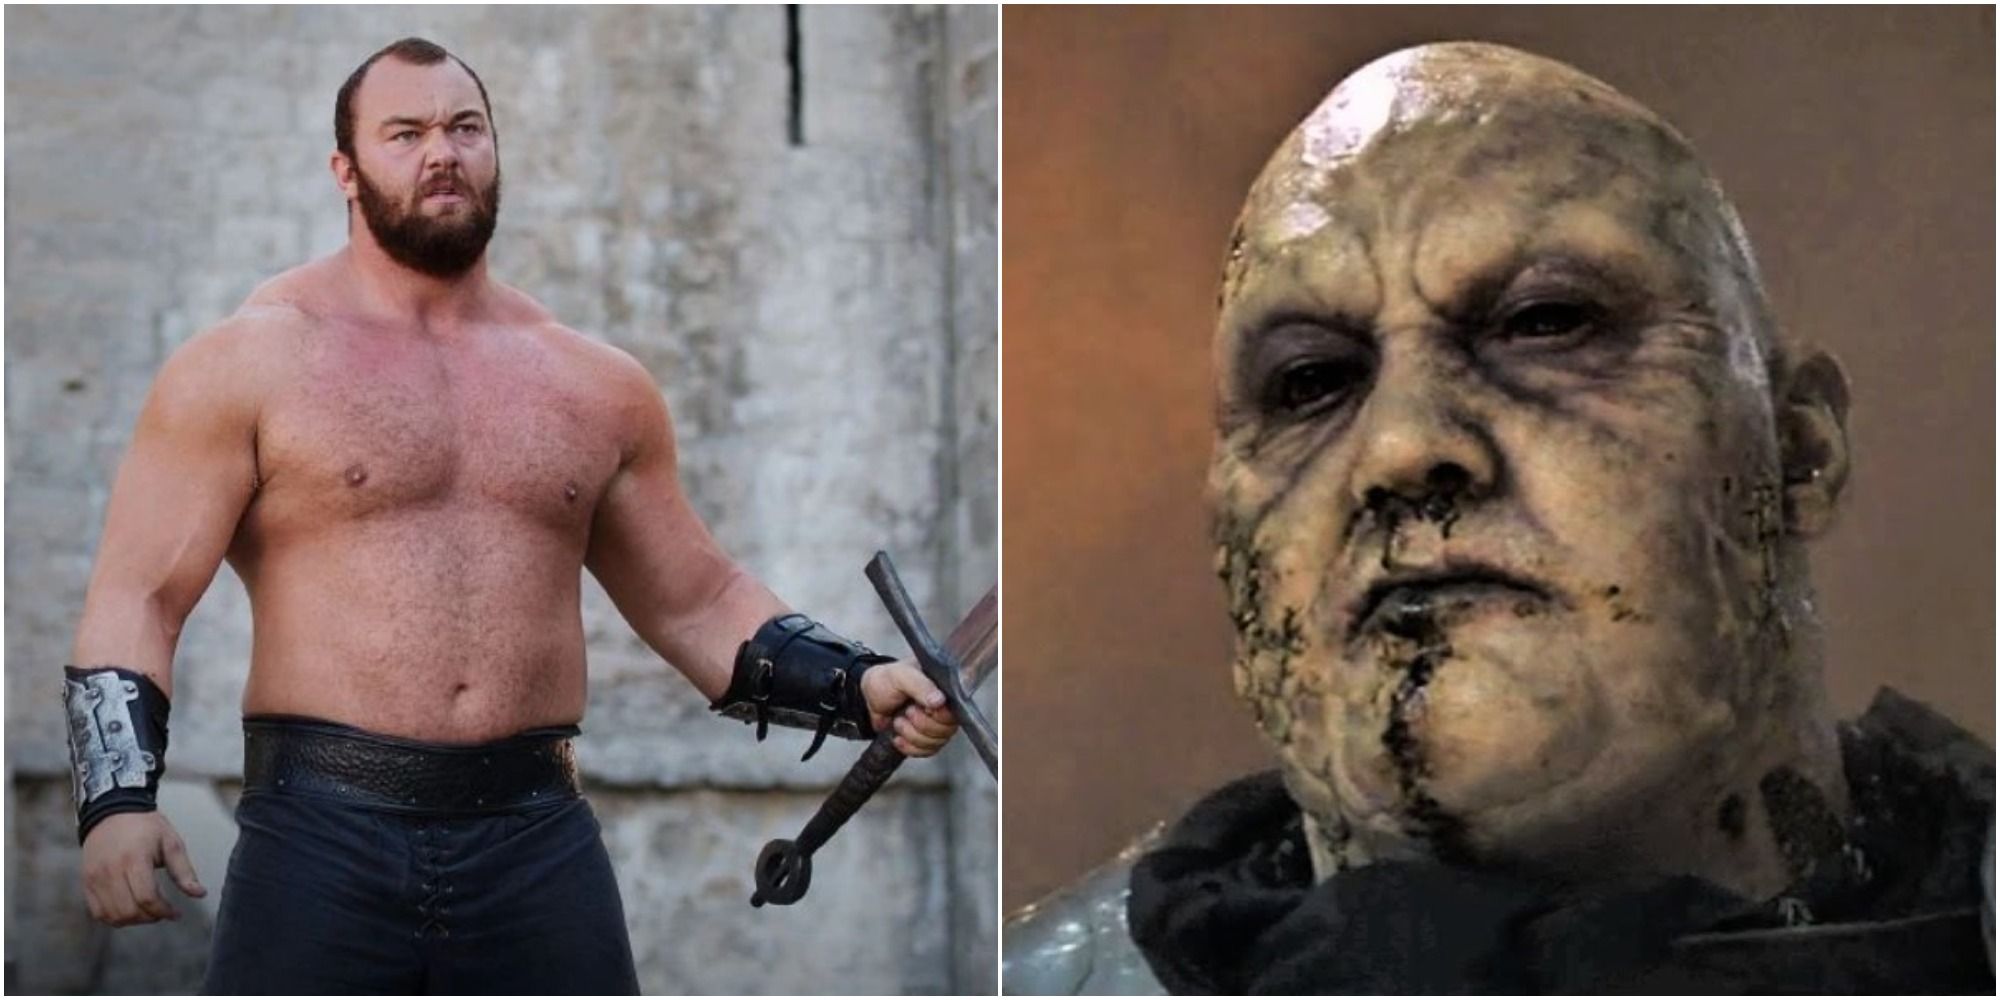 Game of Thrones - The Mountain